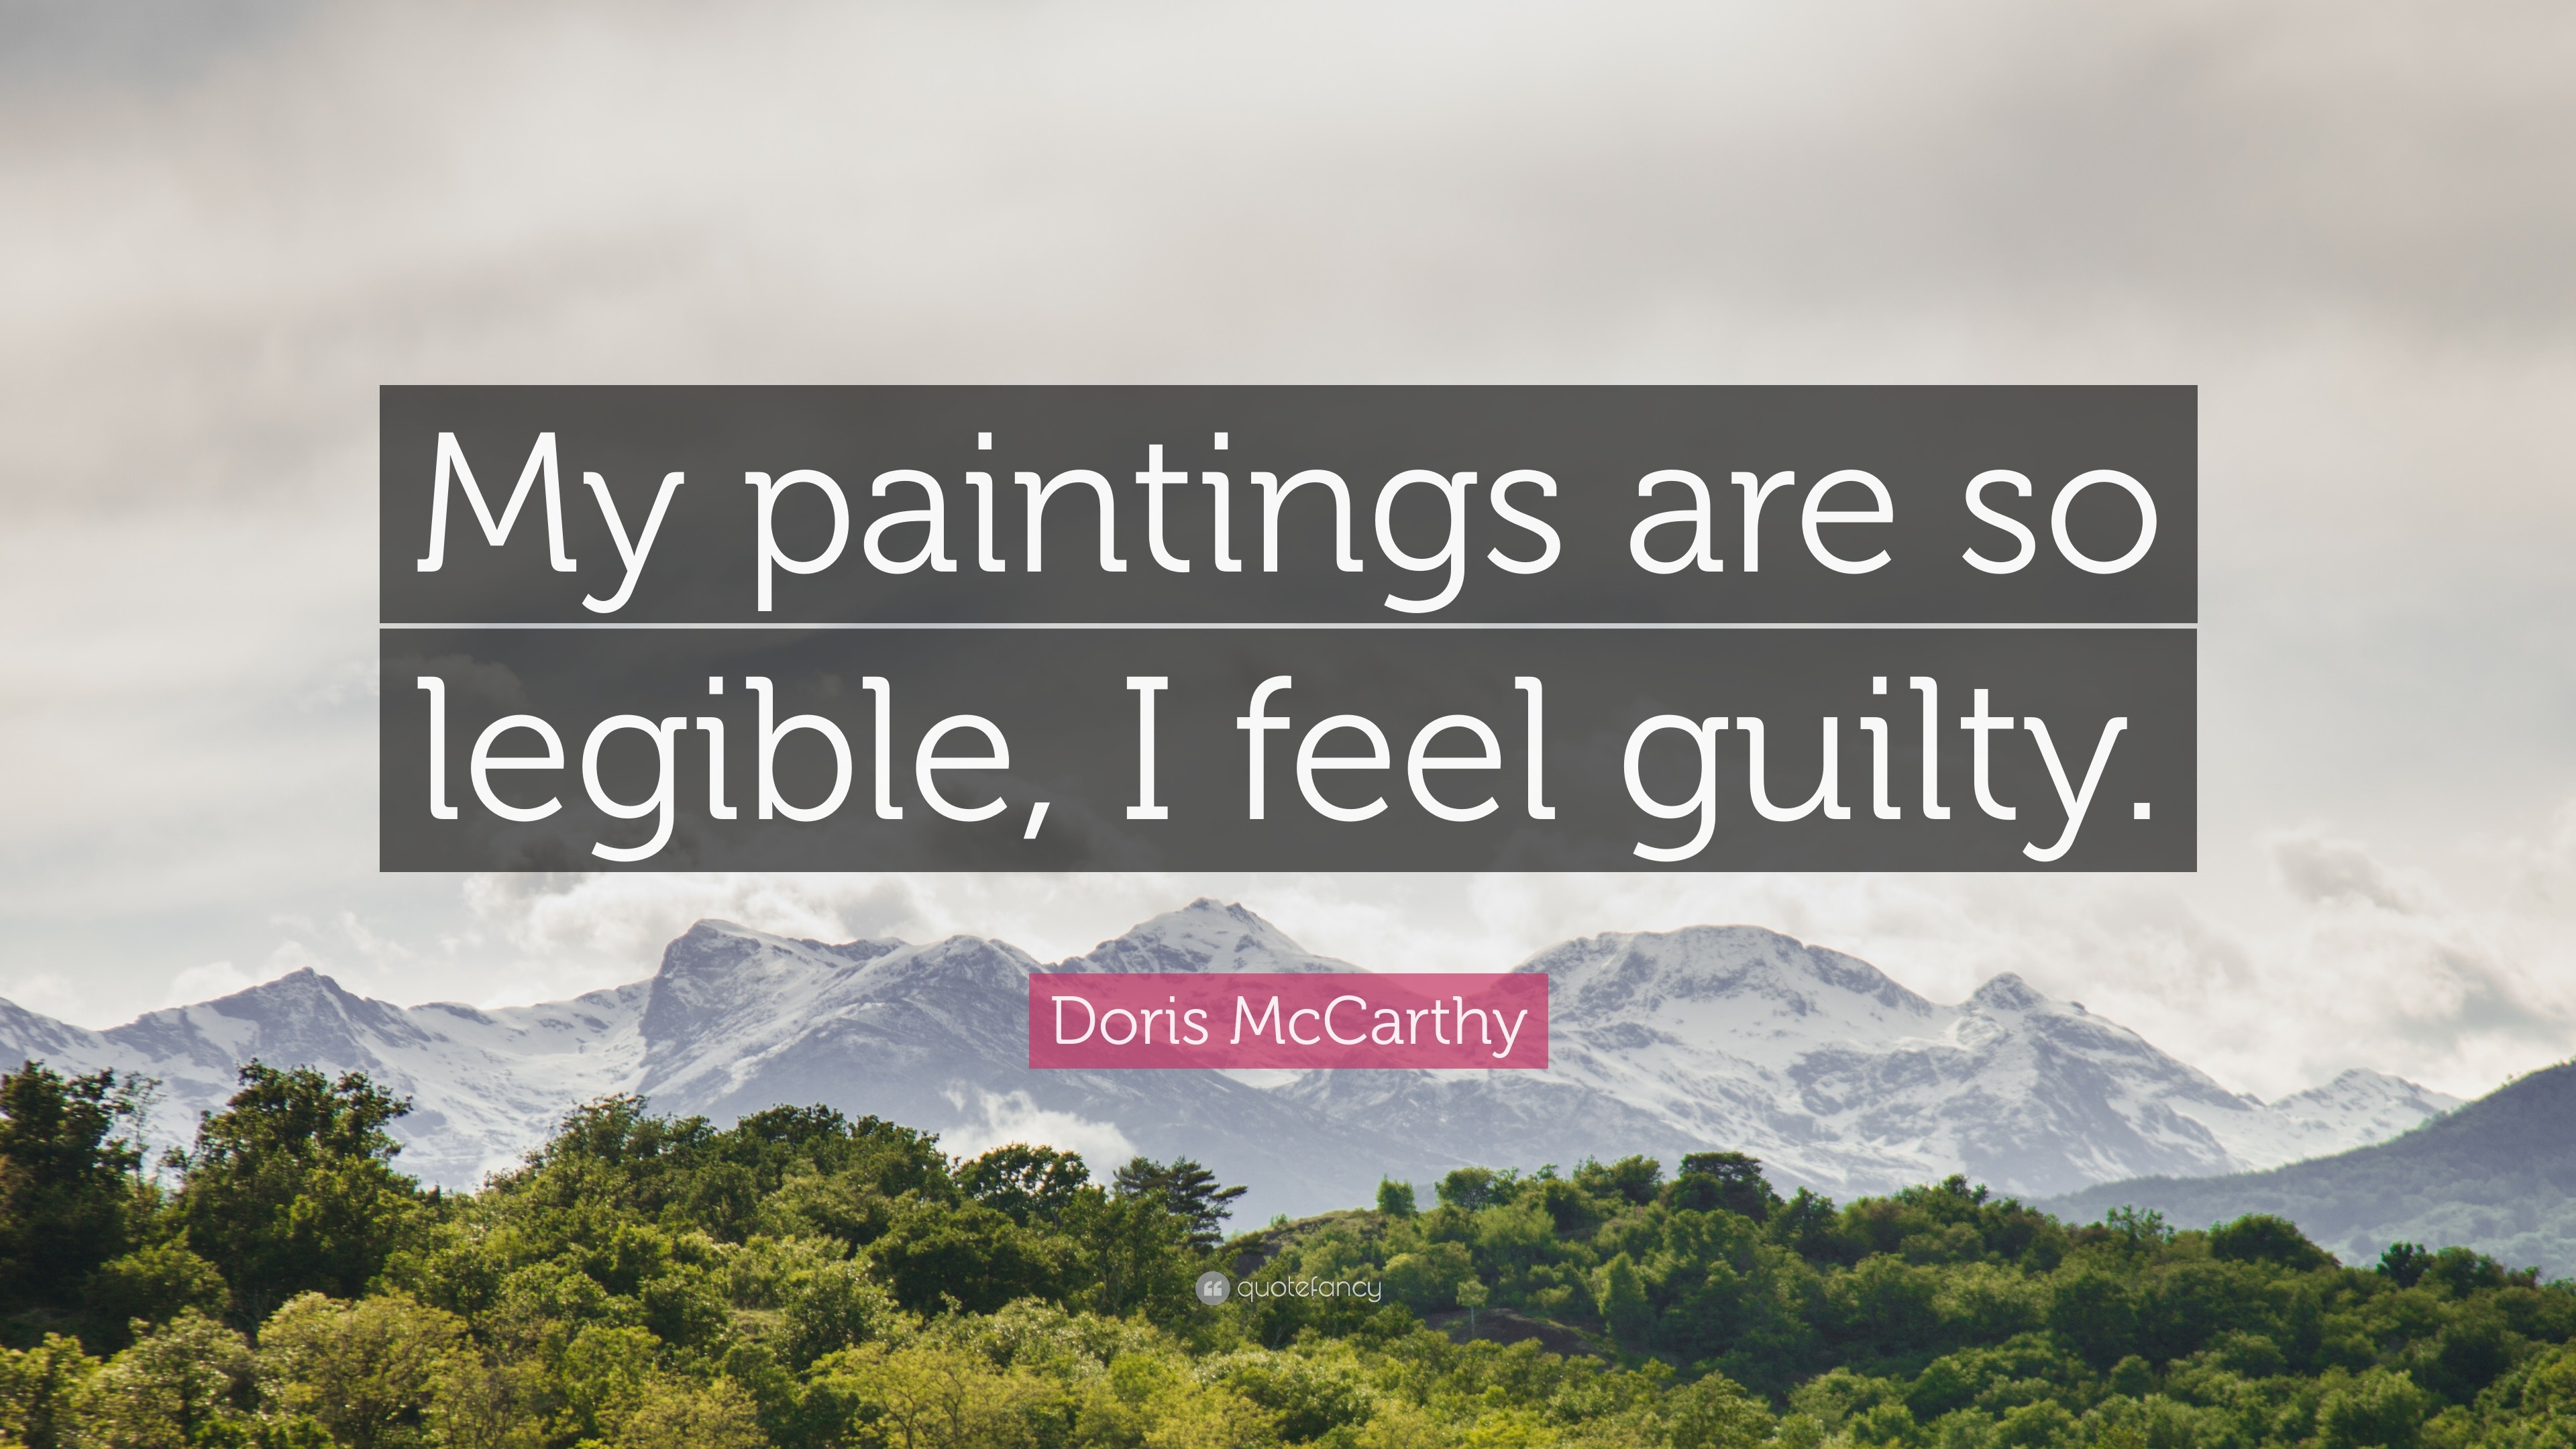 Doris McCarthy Quote: “My paintings are so legible, I feel guilty.”